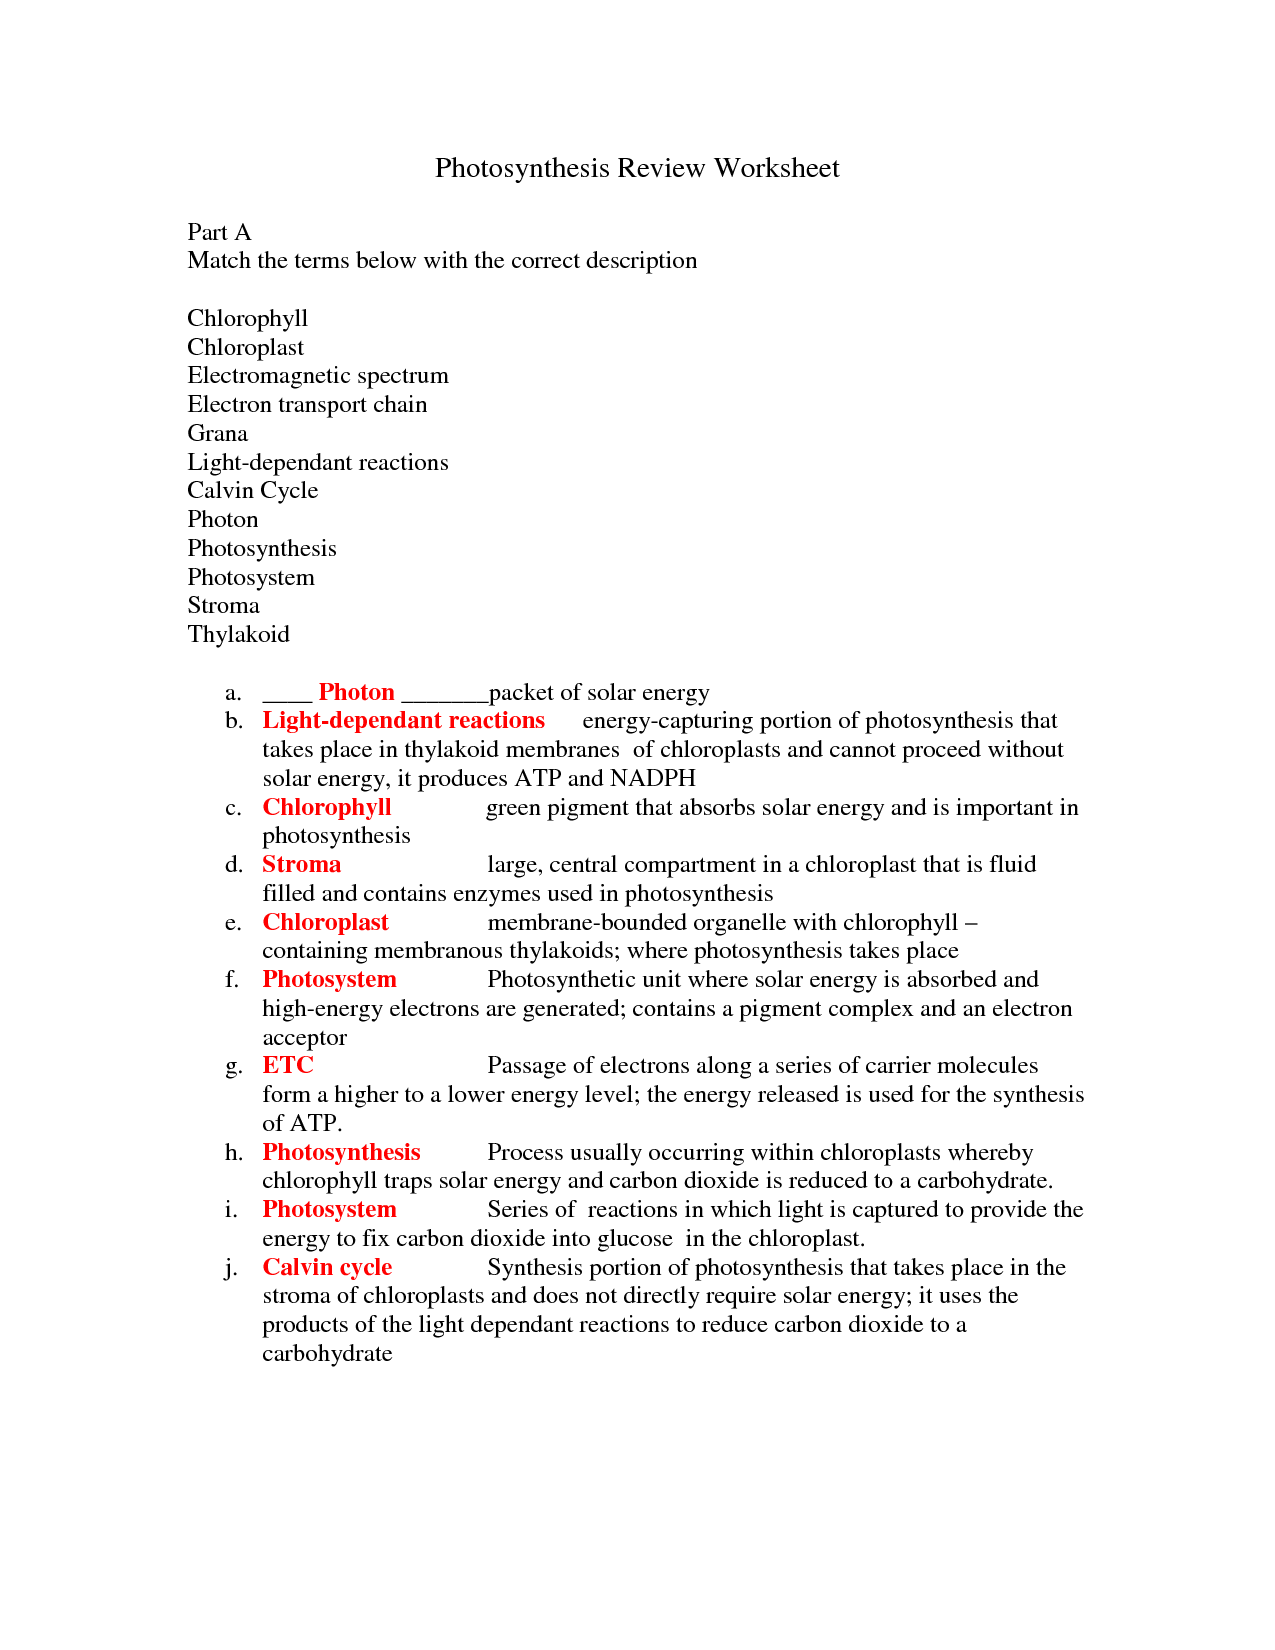 14-best-images-of-photosynthesis-worksheet-answer-key-photosynthesis